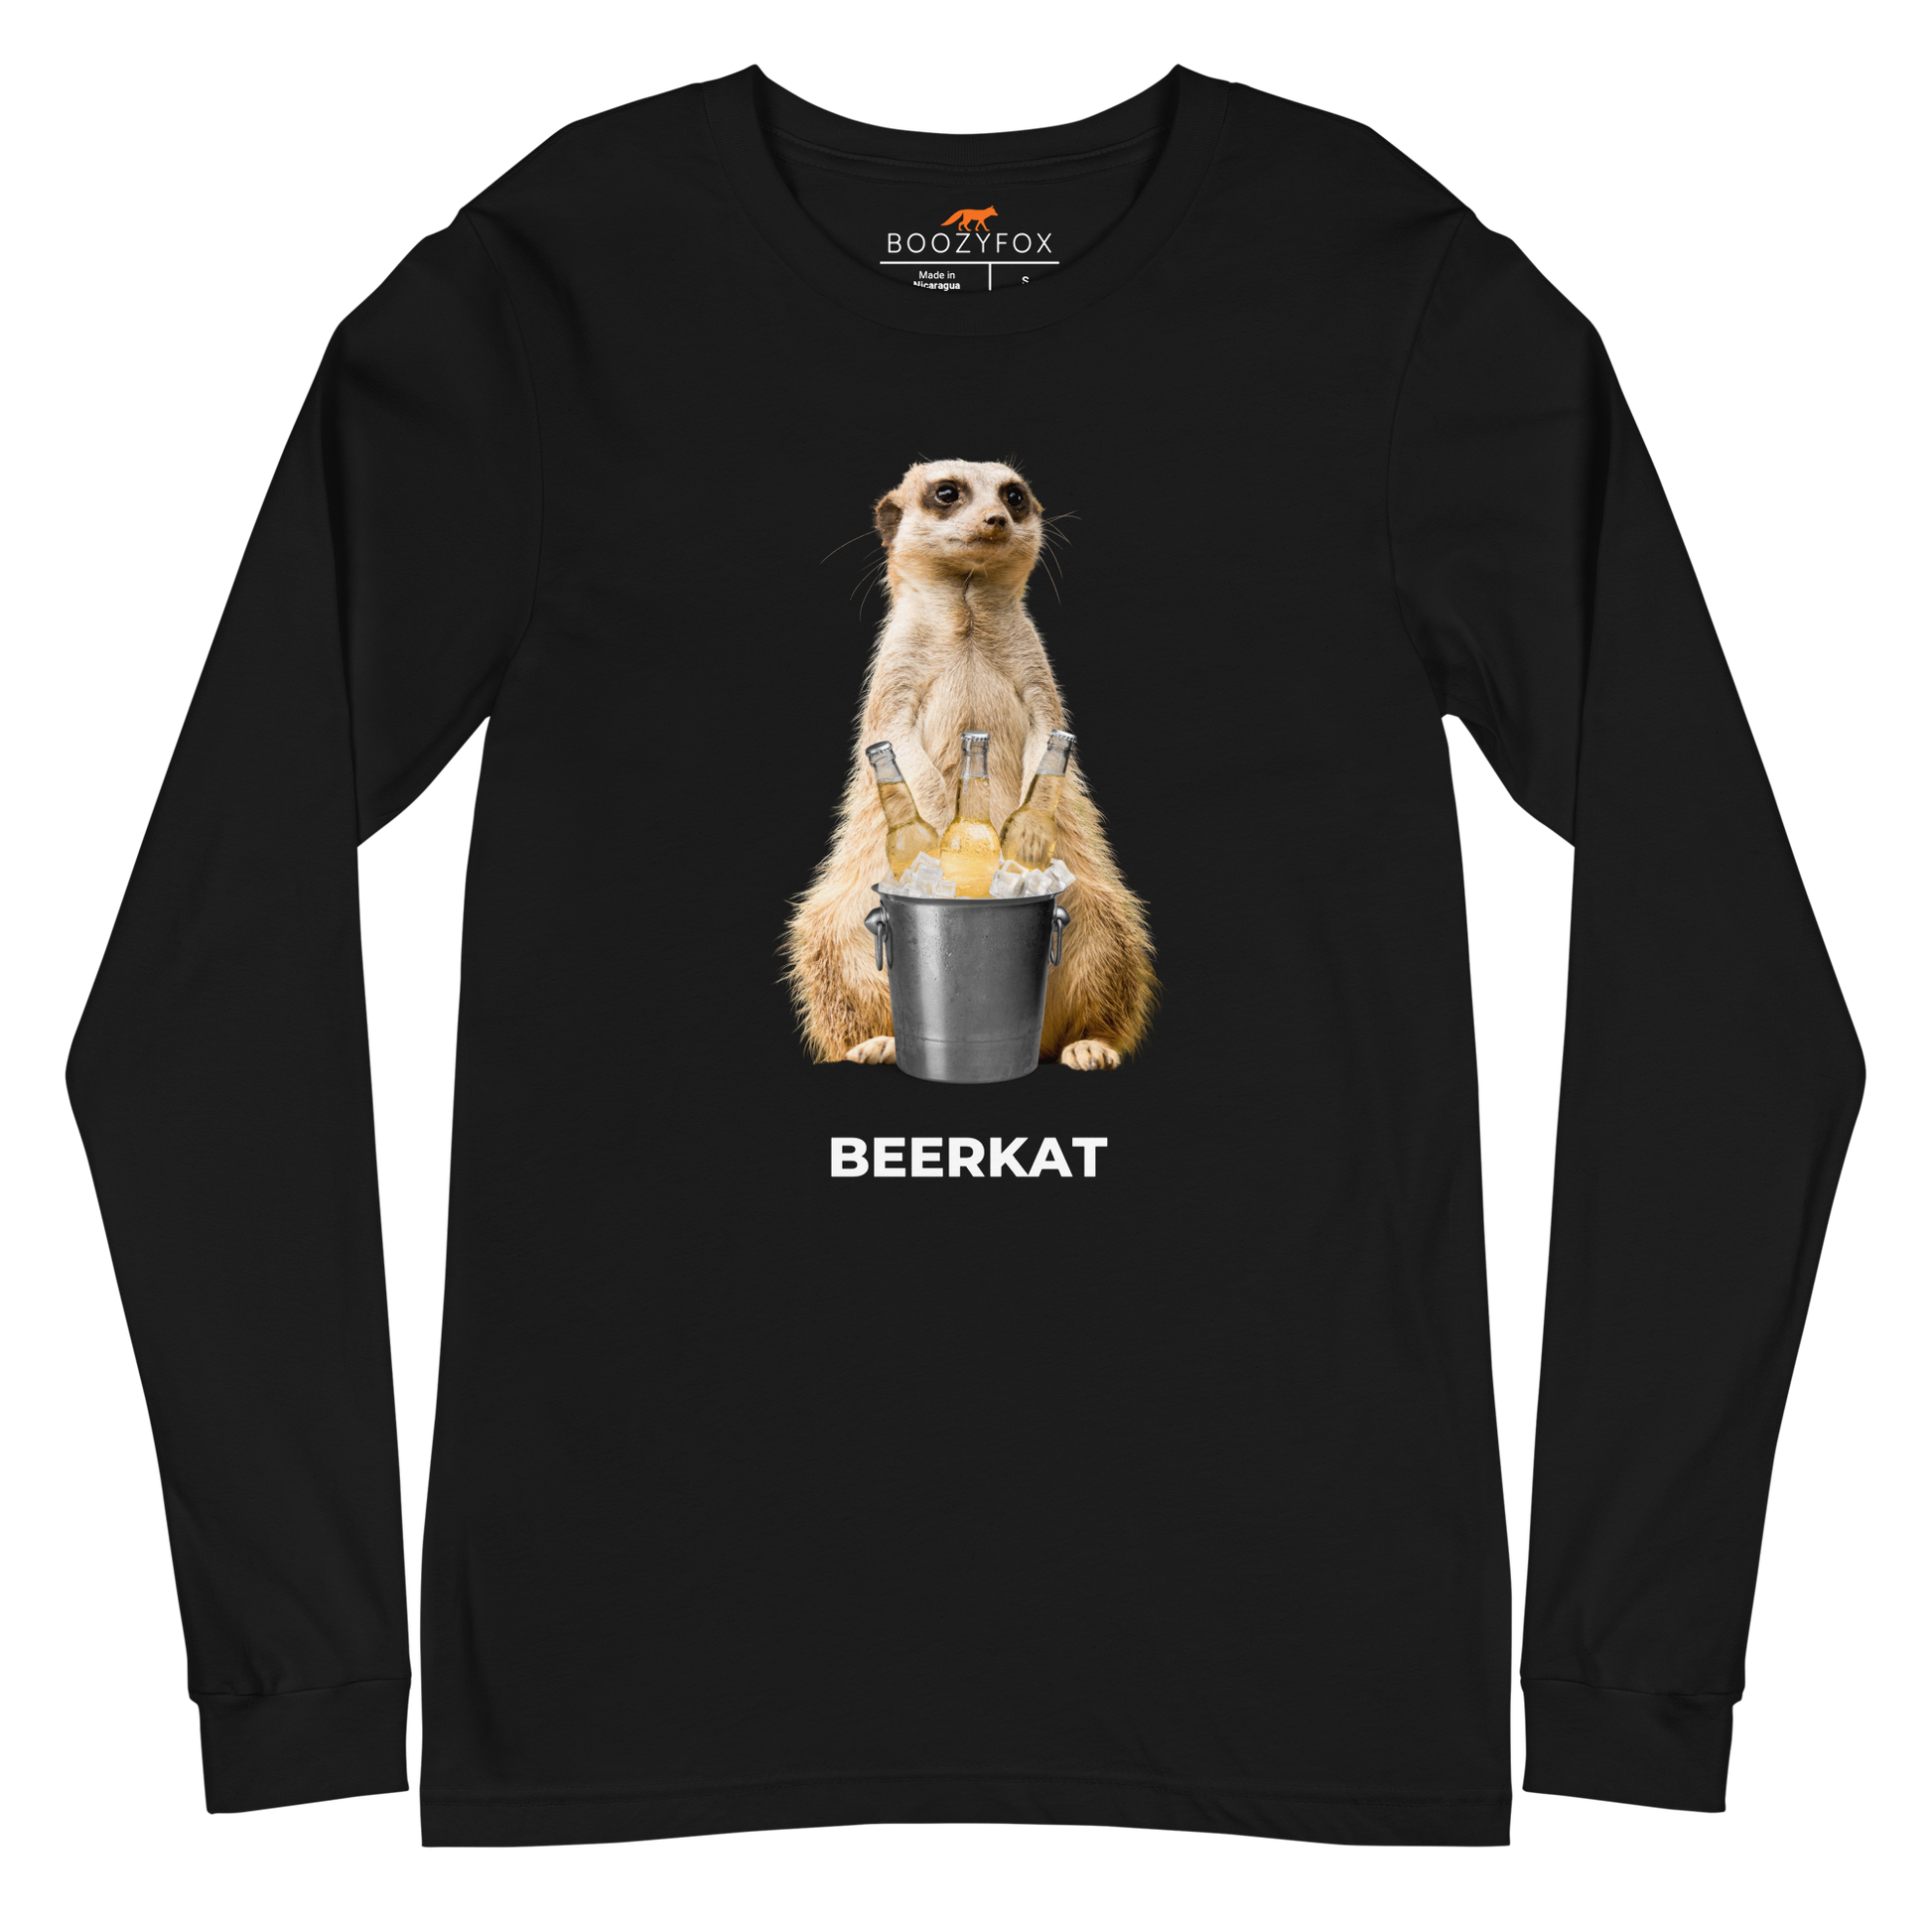 Black Meerkat Long Sleeve Tee featuring a hilarious Beerkat graphic on the chest - Funny Meerkat Long Sleeve Graphic Tees - Boozy Fox